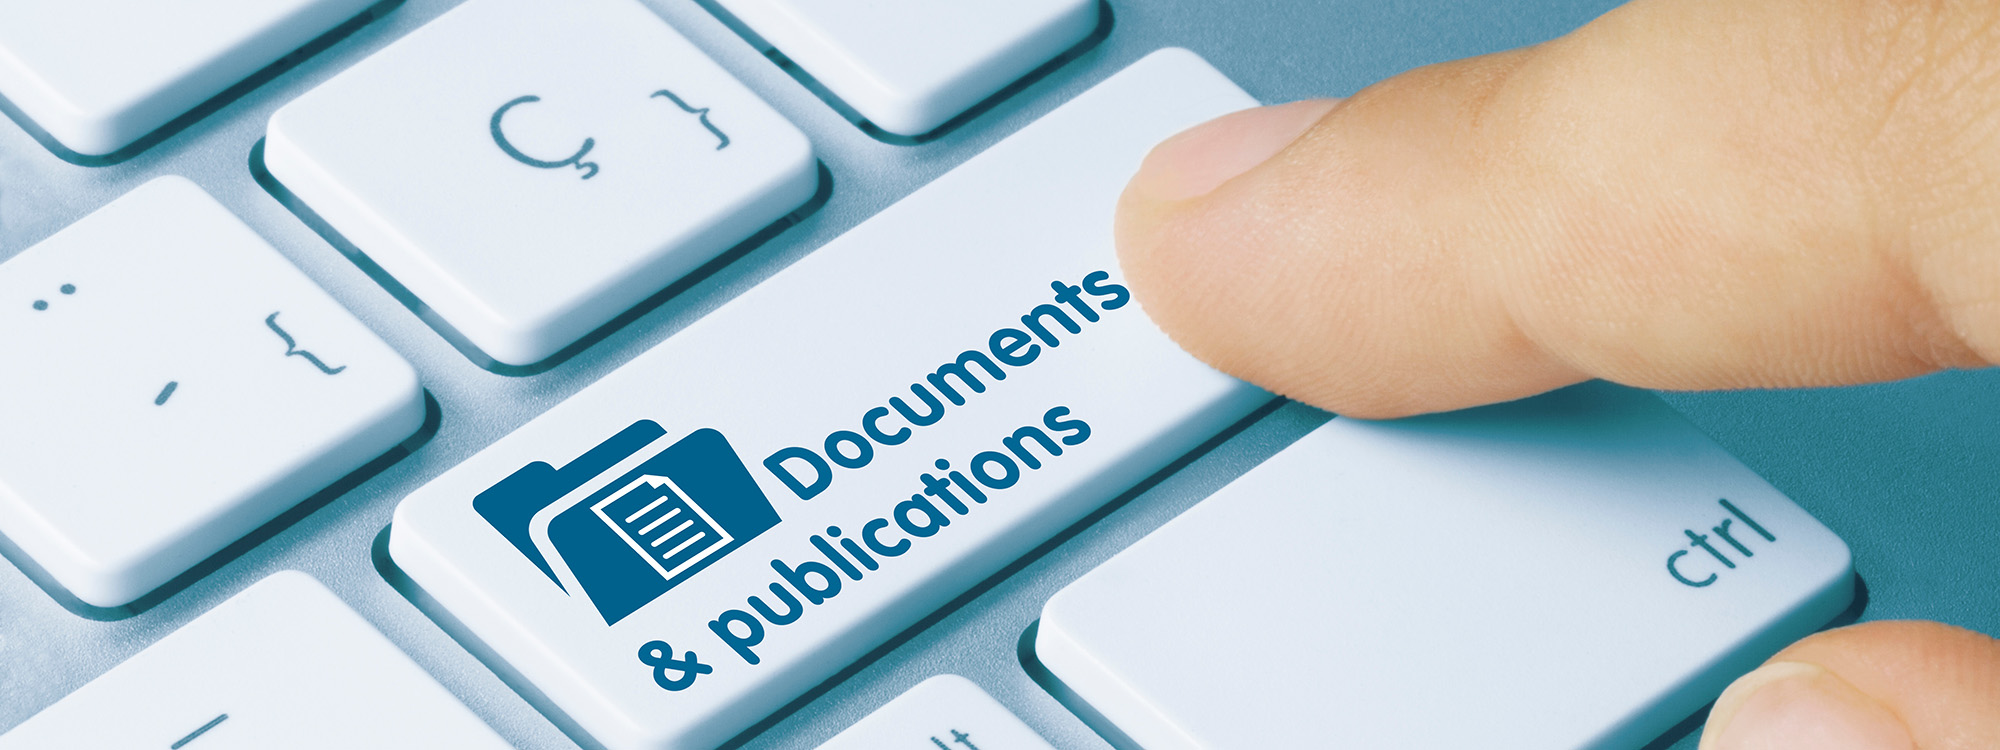 Documents and Publications